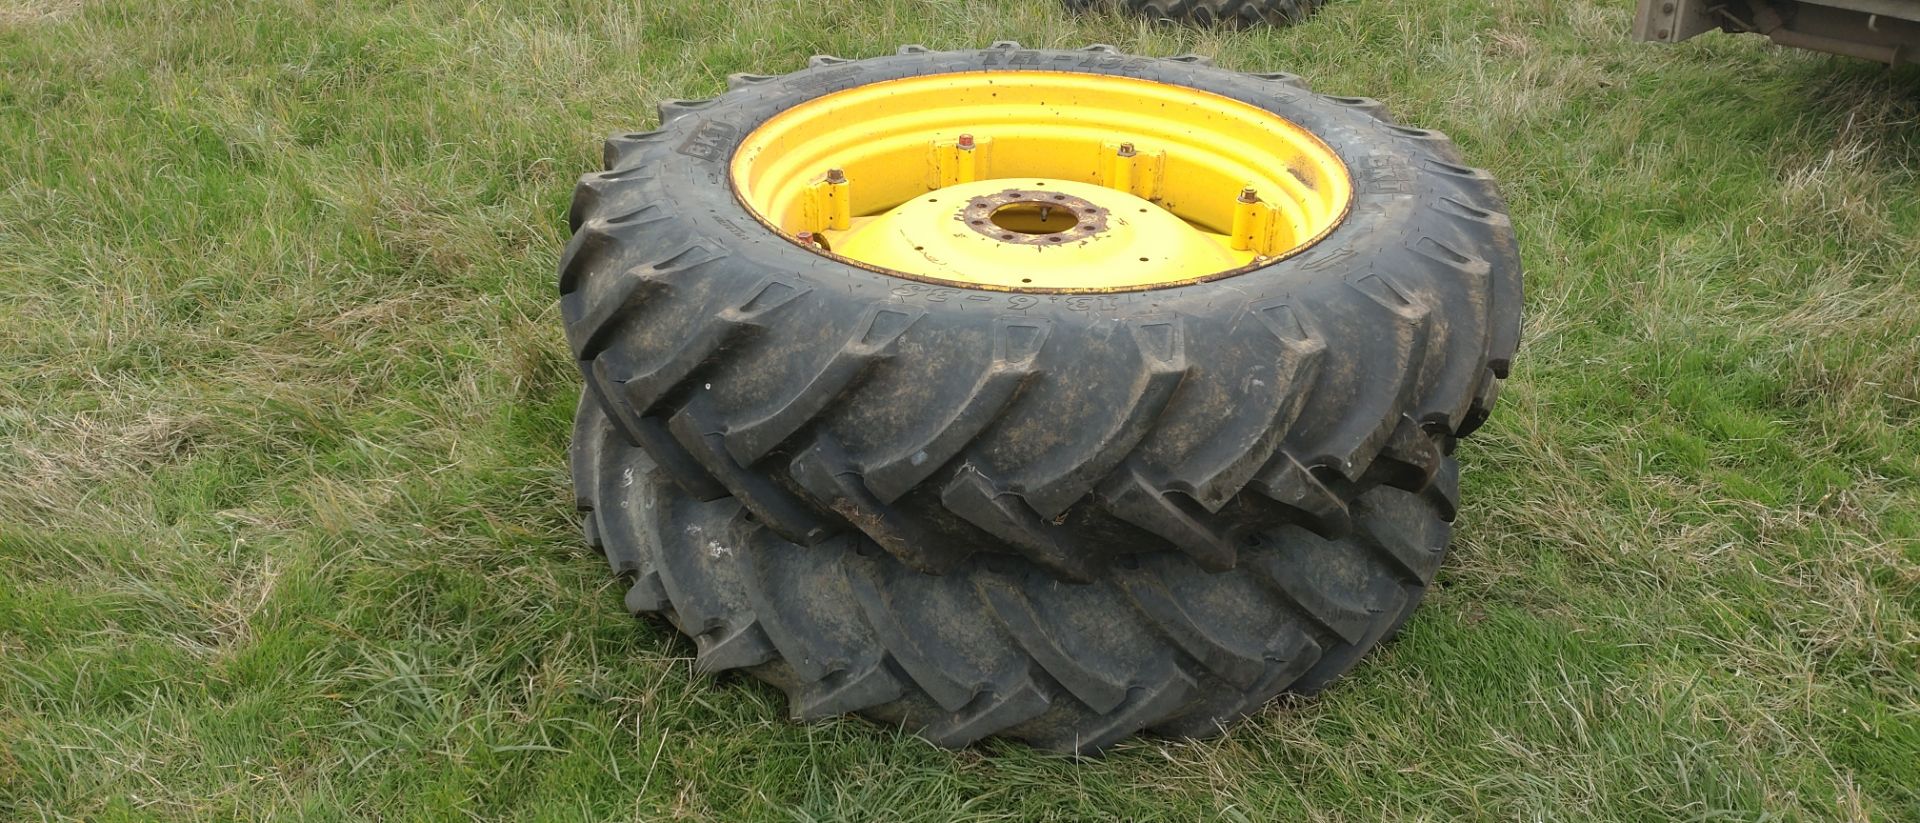 Pair of rear tractor wheels, complete with tyres, as used on J.D 6220/M.F. 6445, BKT 13.